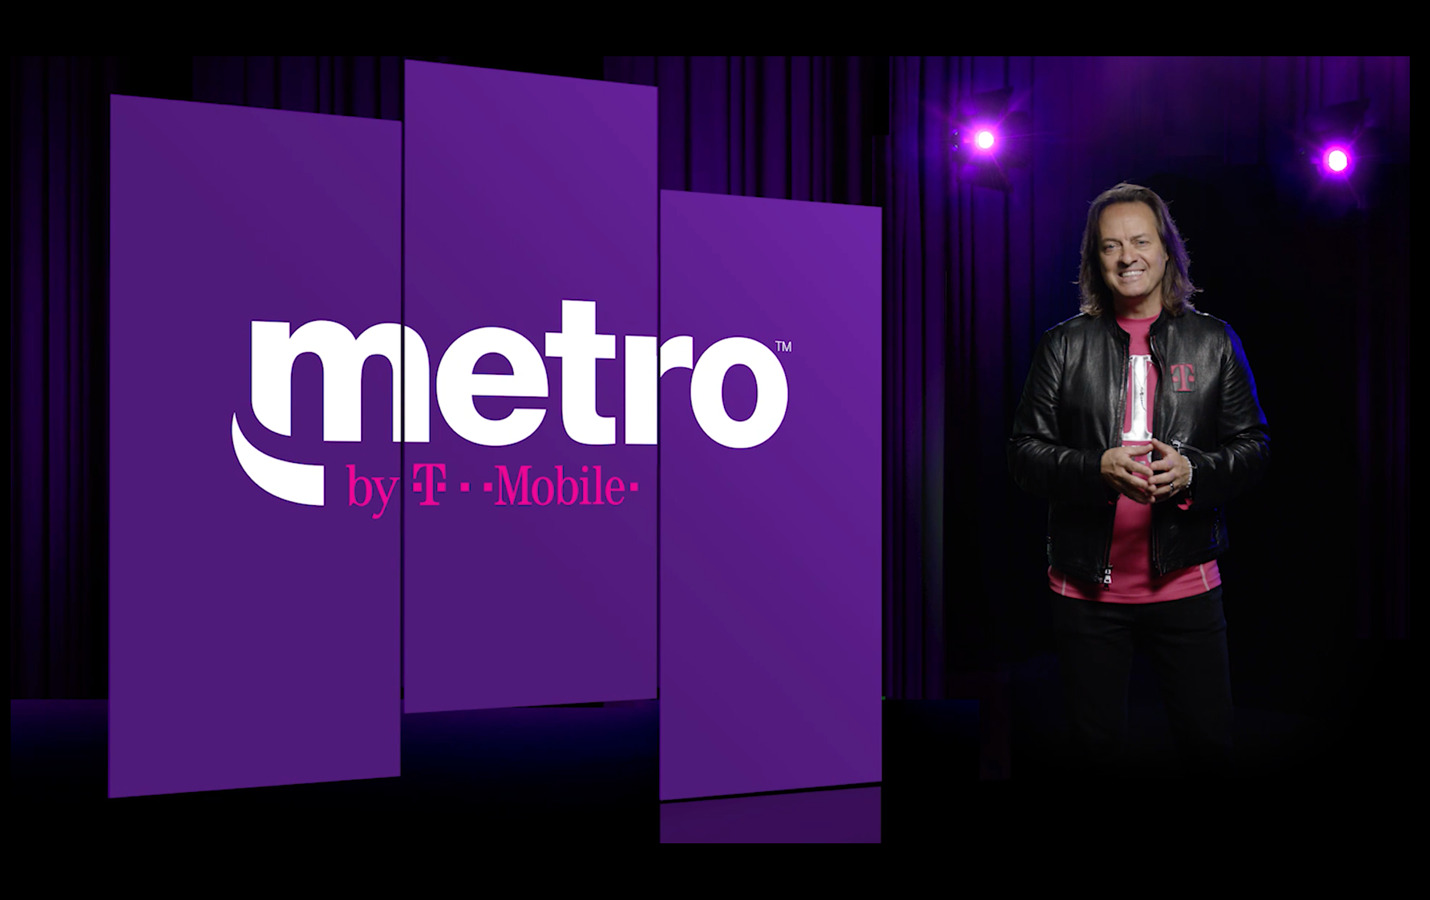 metropcs-is-now-metro-by-t-mobile-includes-amazon-prime